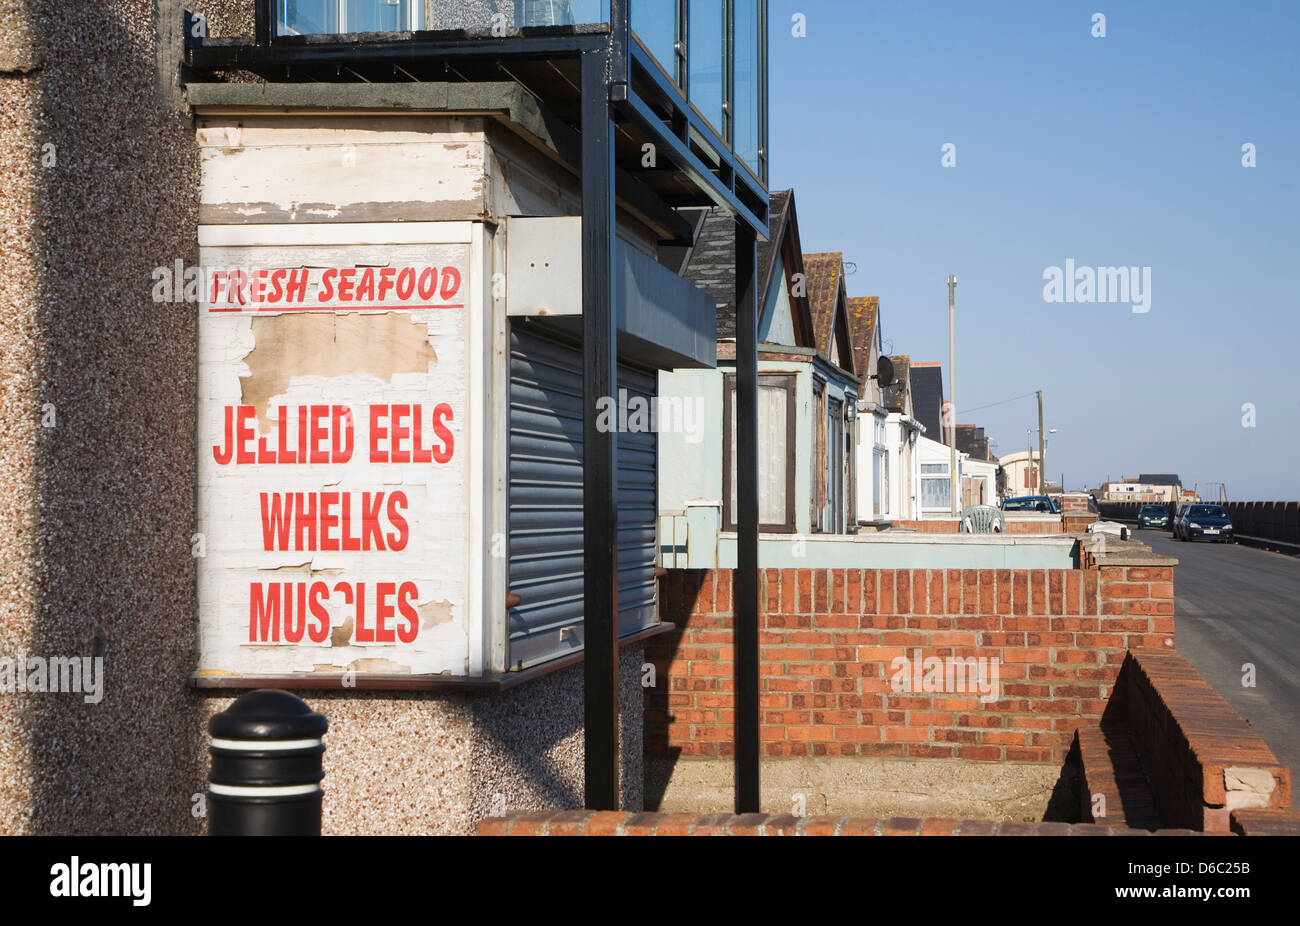 Peeling sign for seafood on Brooklands estate Jaywick, Essex, regarded as the most socially deprived community in England. Stock Photo